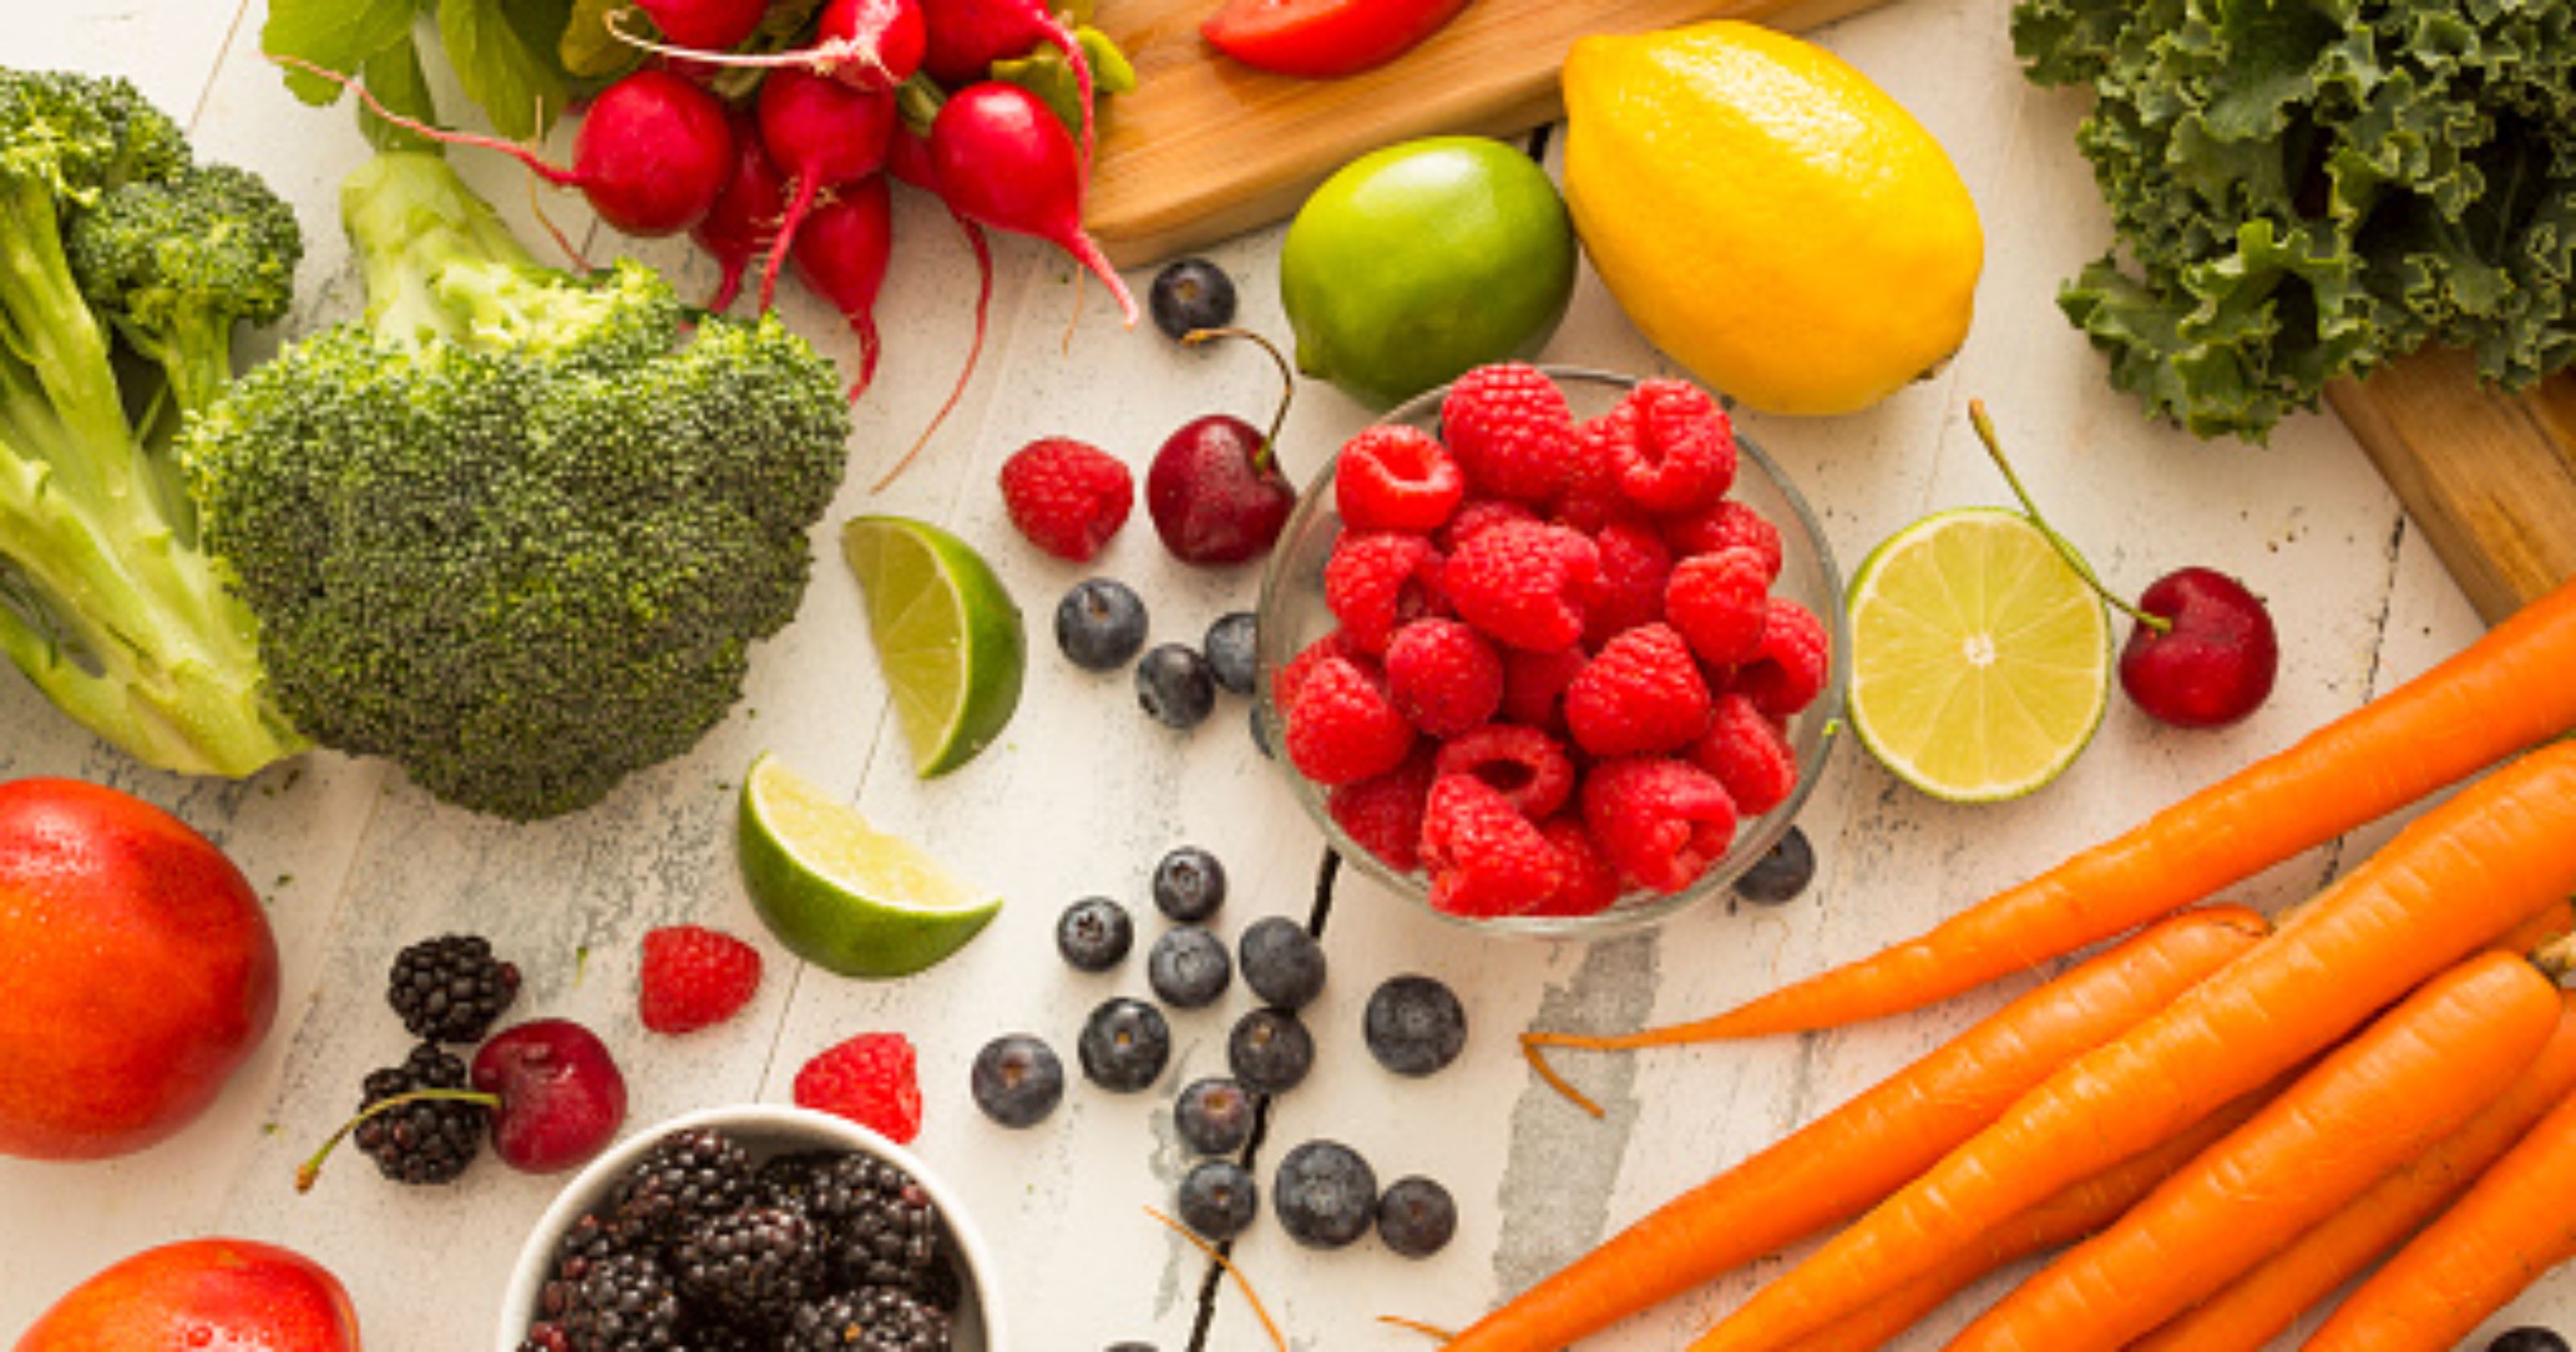 The easiest way to add more fruits and vegetables to your daily diet